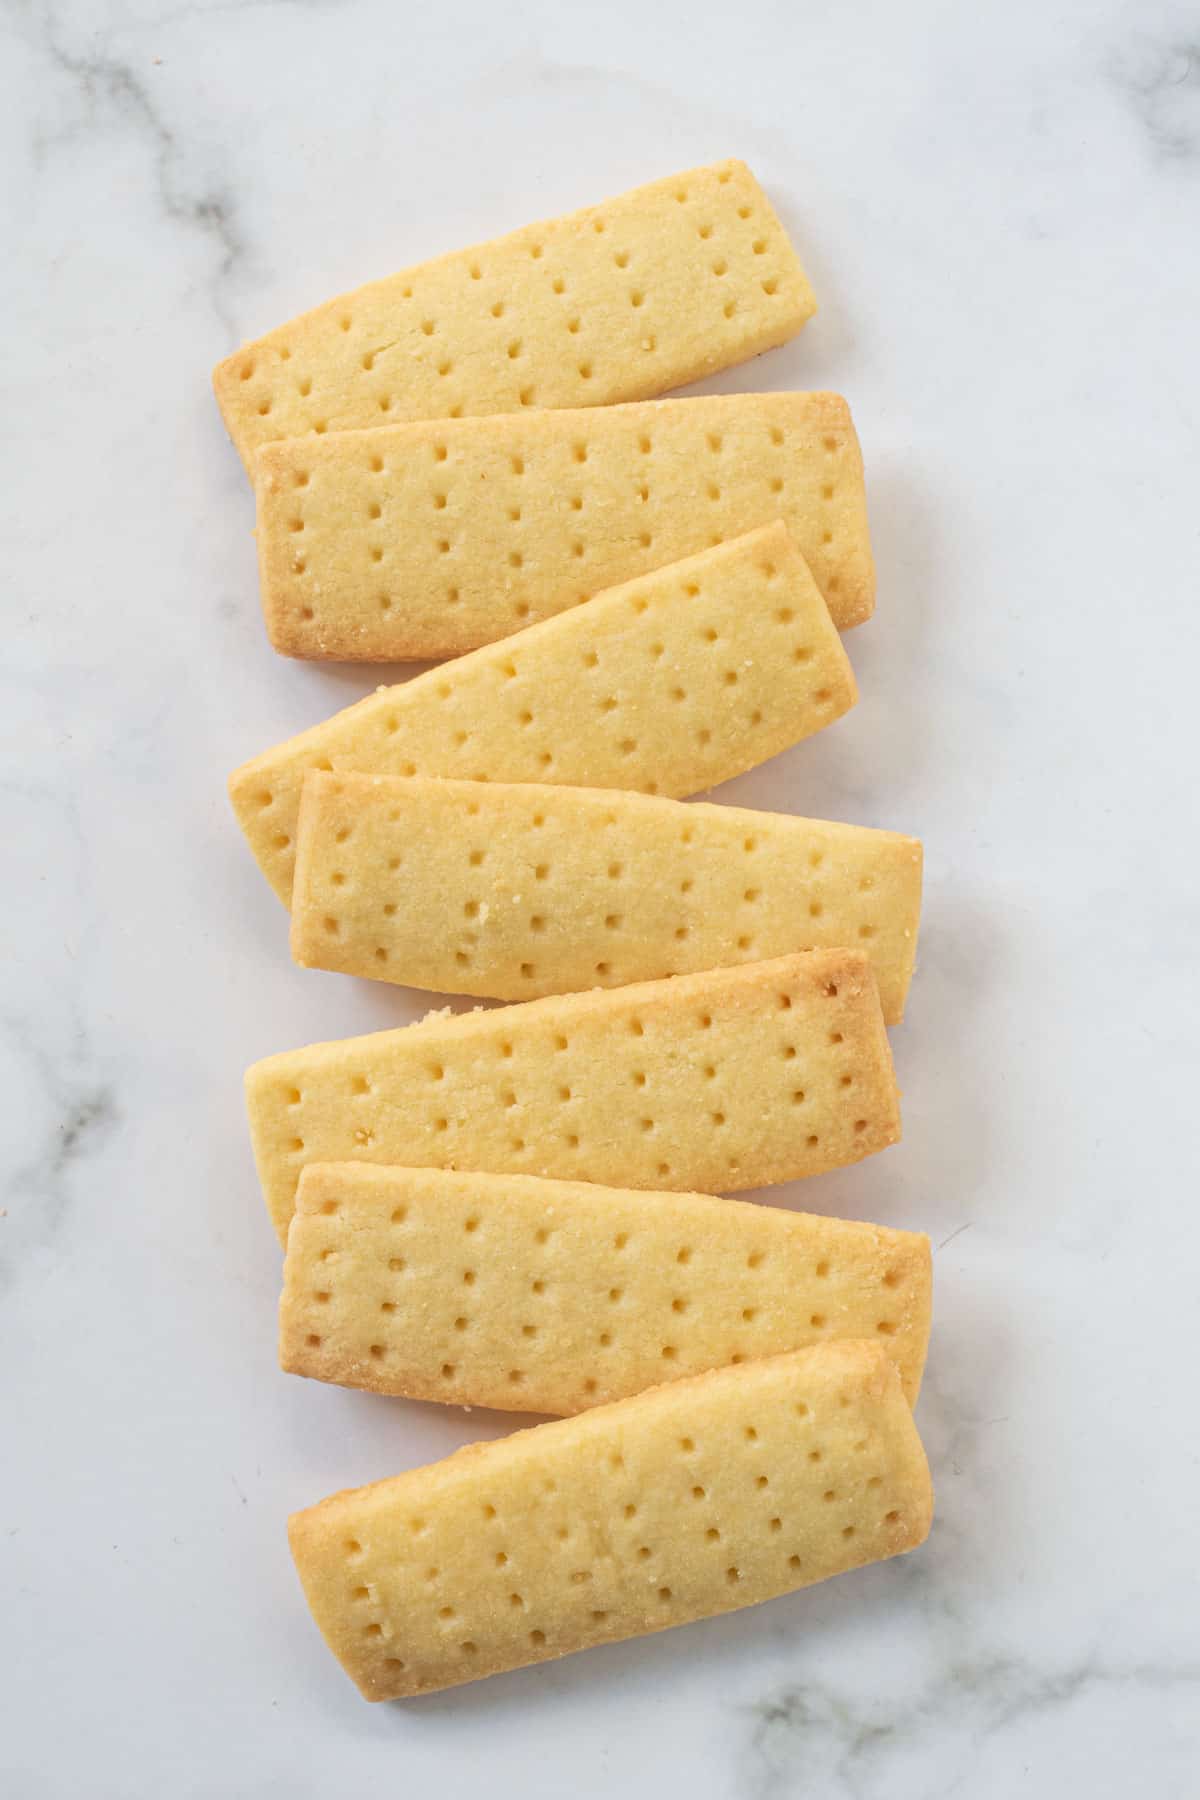 Shortbread cookies recipe - A row of rectangle shaped shortbread cookies against a marble background.